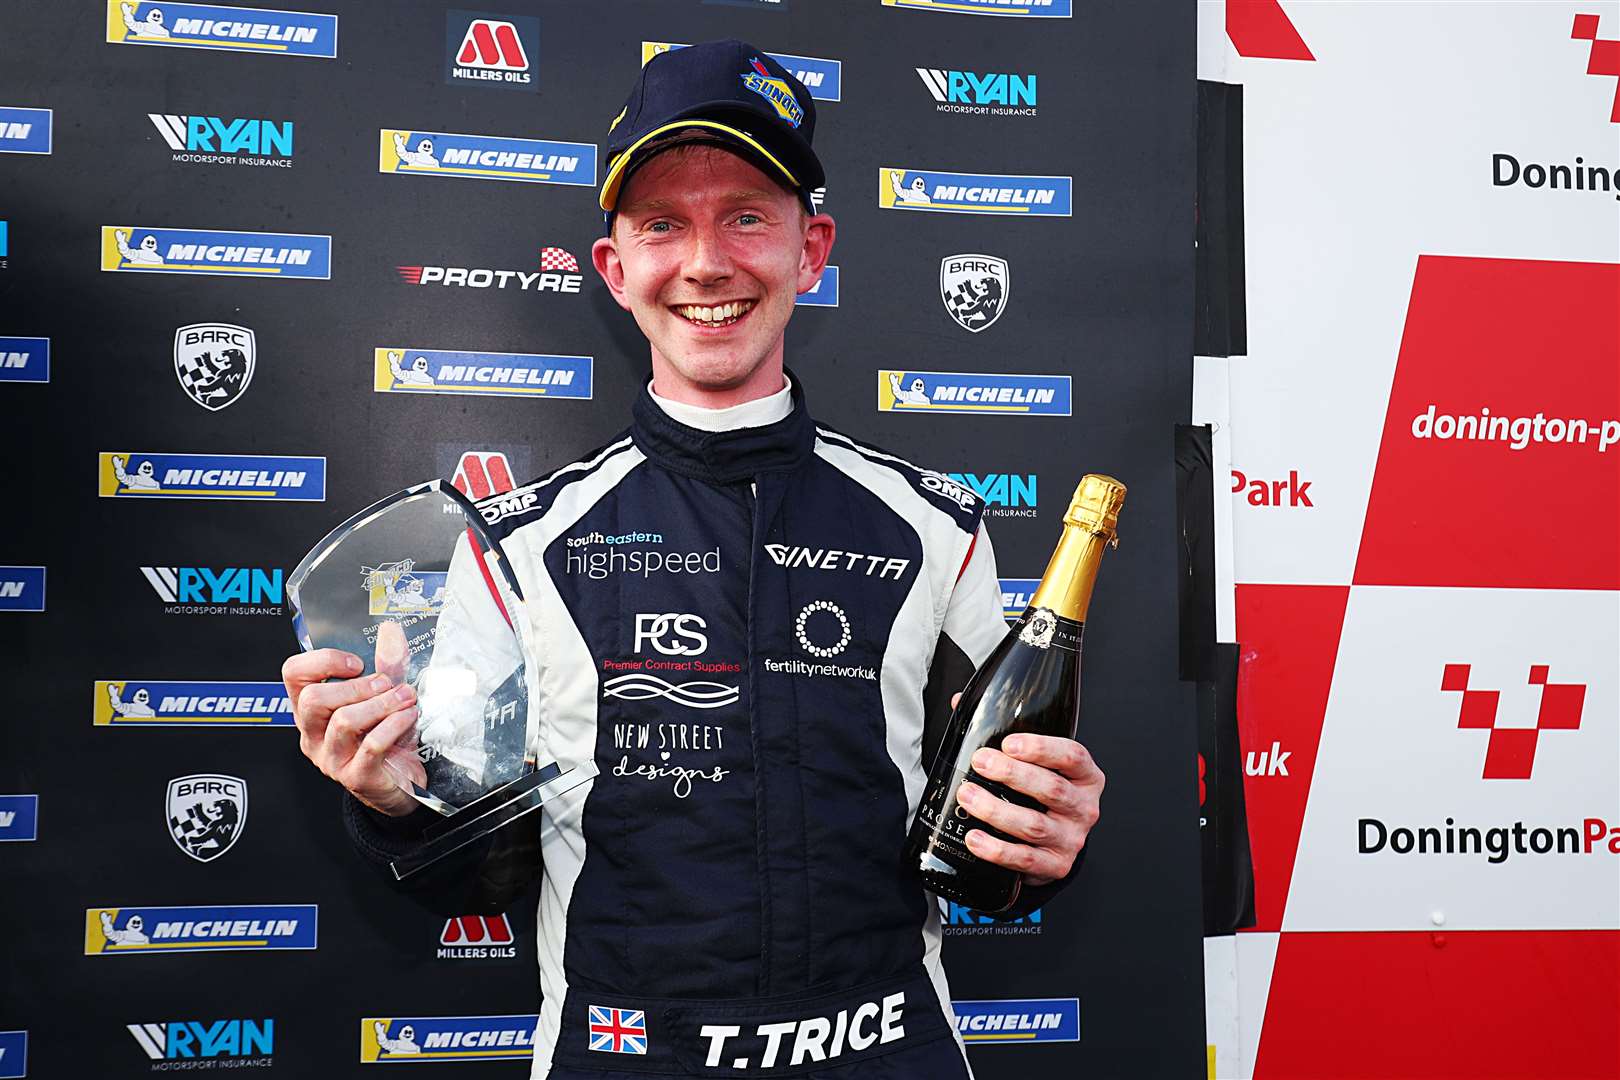 Toby Trice has had plenty of success in motorsport despite being a late starter